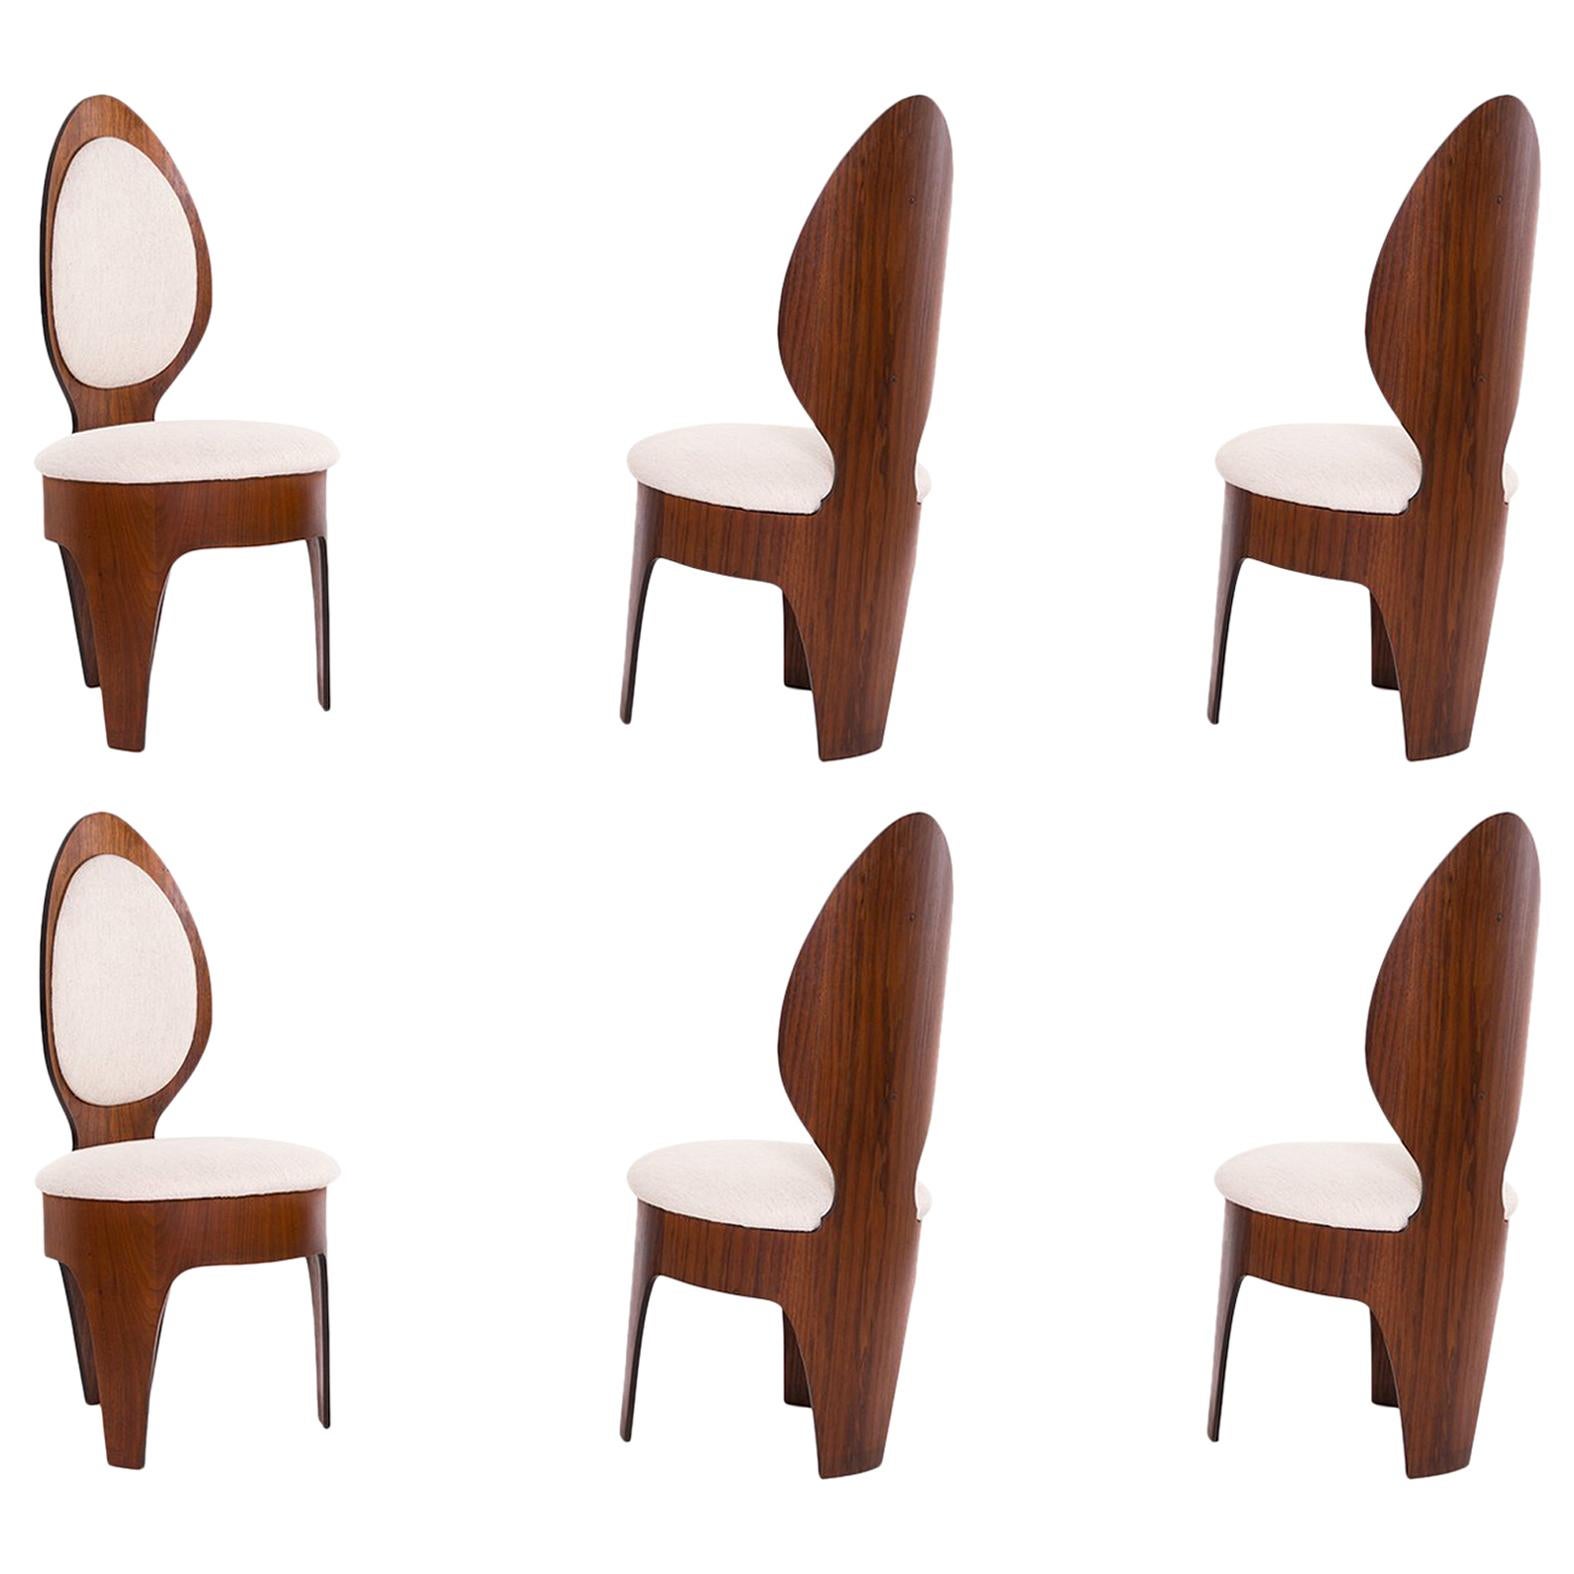 Henry Glass Walnut 'Spoon' Dining Chairs